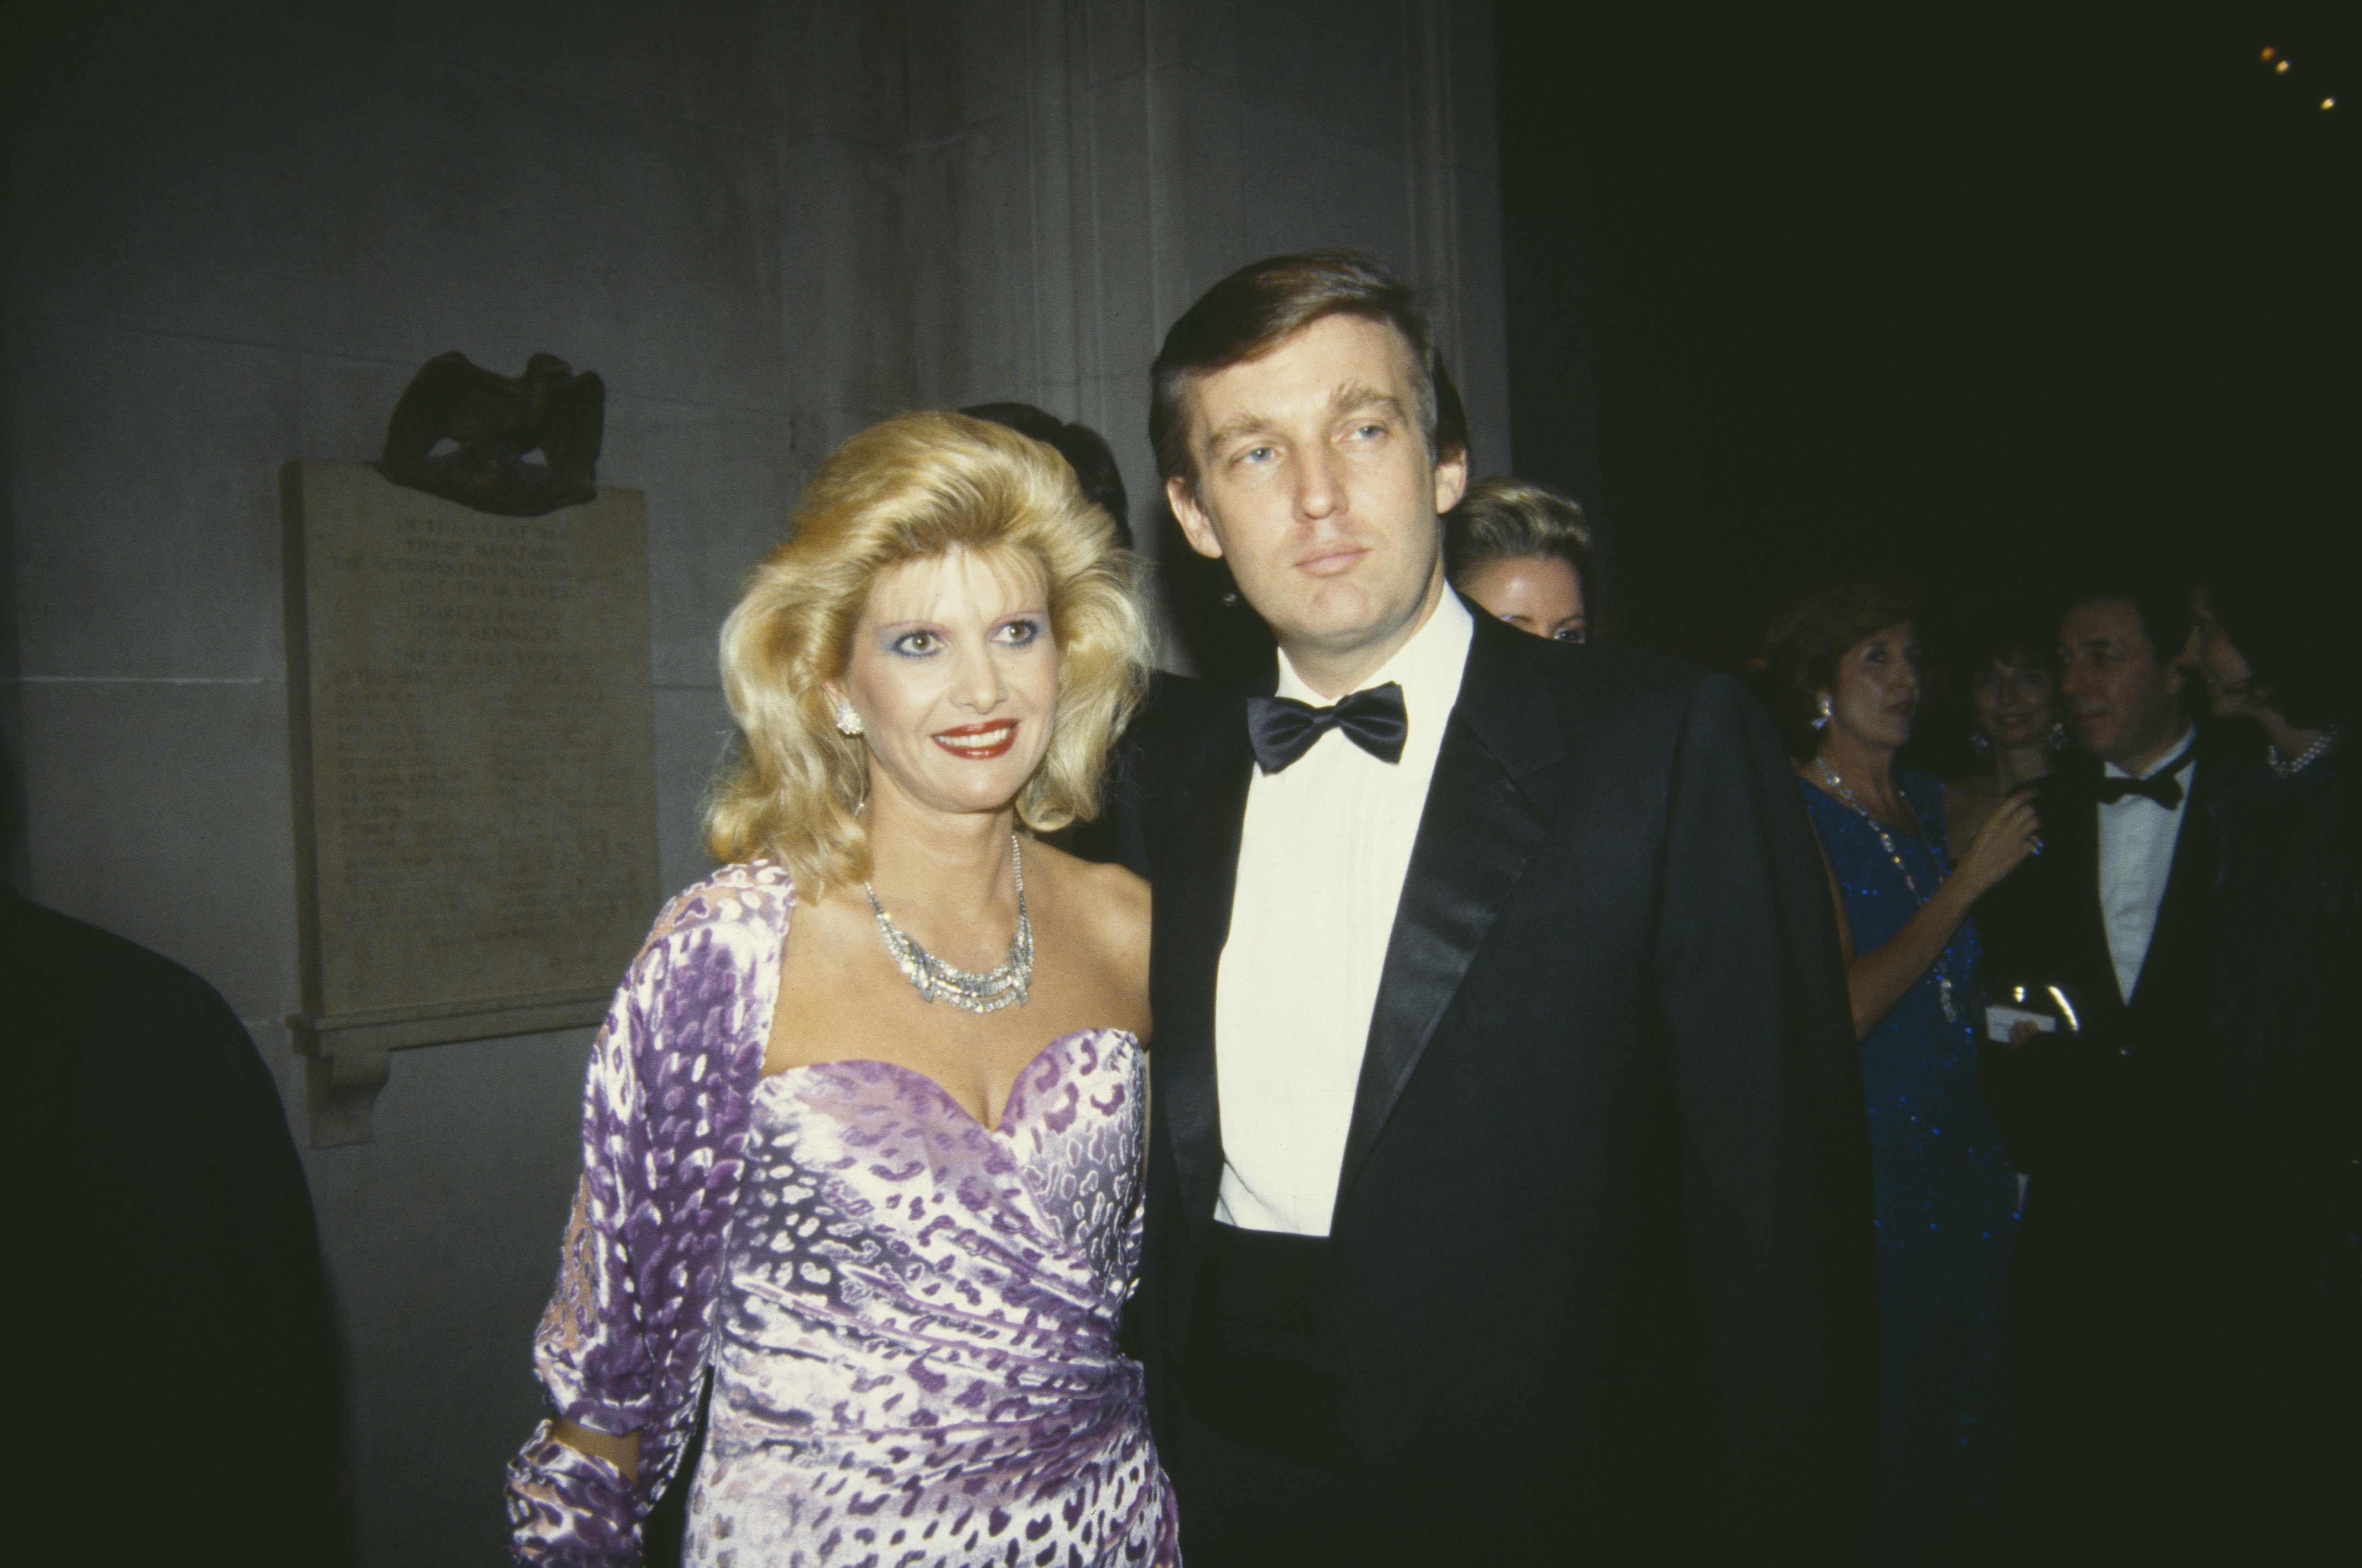 American real estate magnate Donald Trump with his first wife, Ivana (nee Zelnickova) at the Costume Institute Gala, held at the Metropolitan Museum of Art, New York City, 9th December 1985 | Source: Getty Images